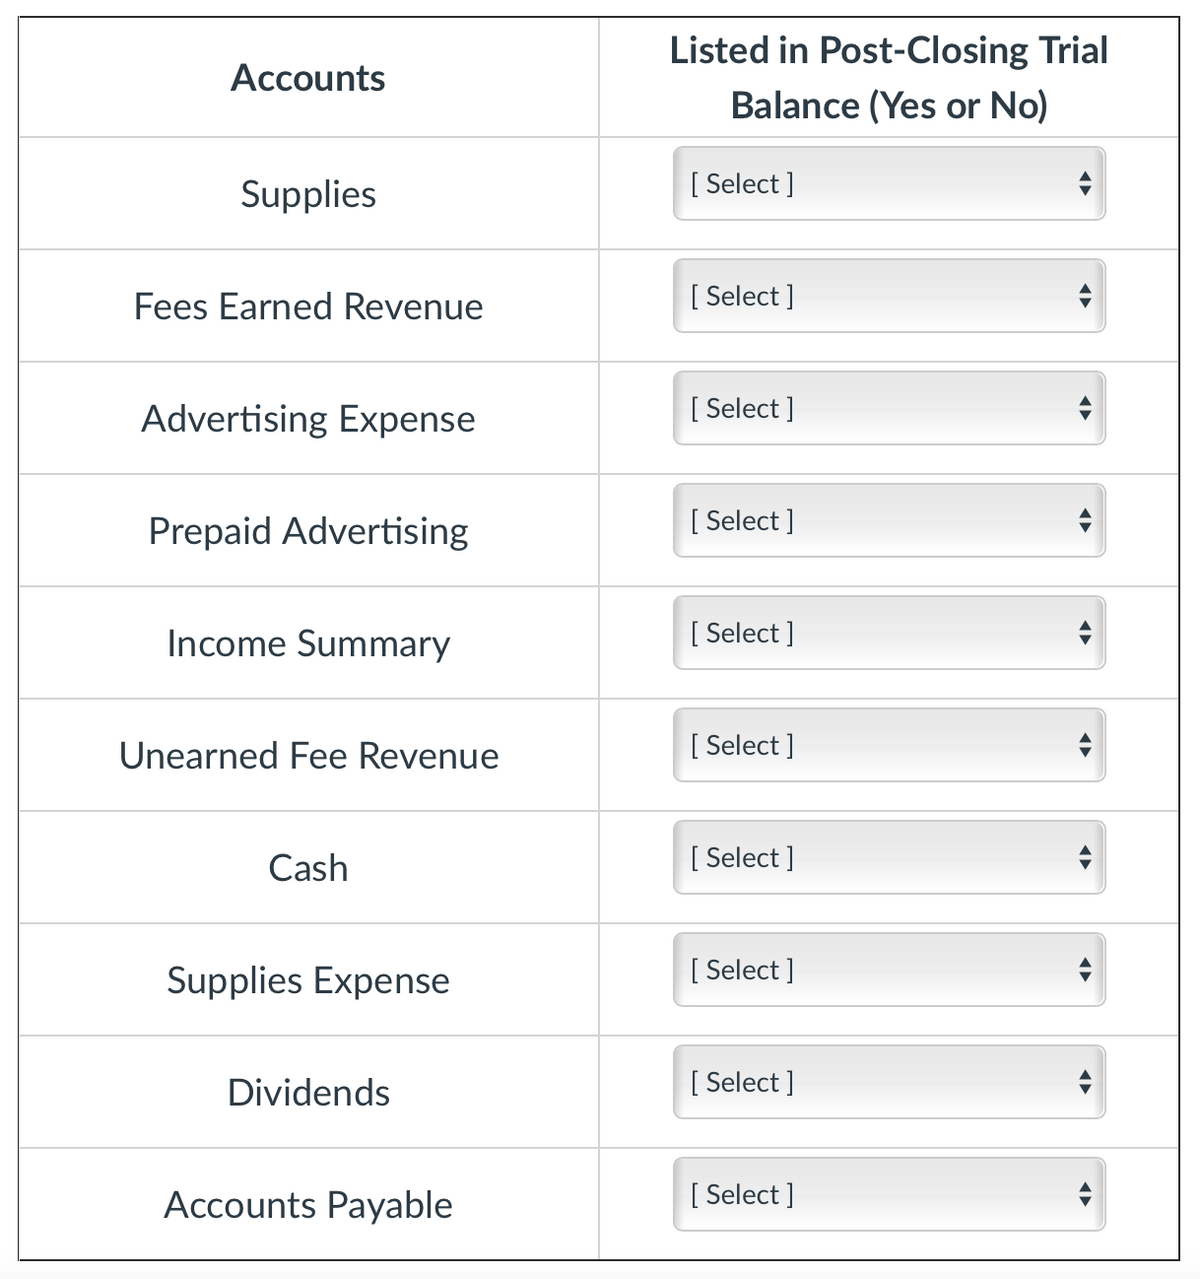 Listed in Post-Closing Trial
Accounts
Balance (Yes or No)
Supplies
[ Select ]
Fees Earned Revenue
[ Select ]
Advertising Expense
[ Select ]
Prepaid Advertising
[ Select ]
Income Summary
[ Select ]
Unearned Fee Revenue
[ Select ]
Cash
[ Select ]
Supplies Expense
[ Select ]
Dividends
[ Select ]
Accounts Payable
[ Select ]
